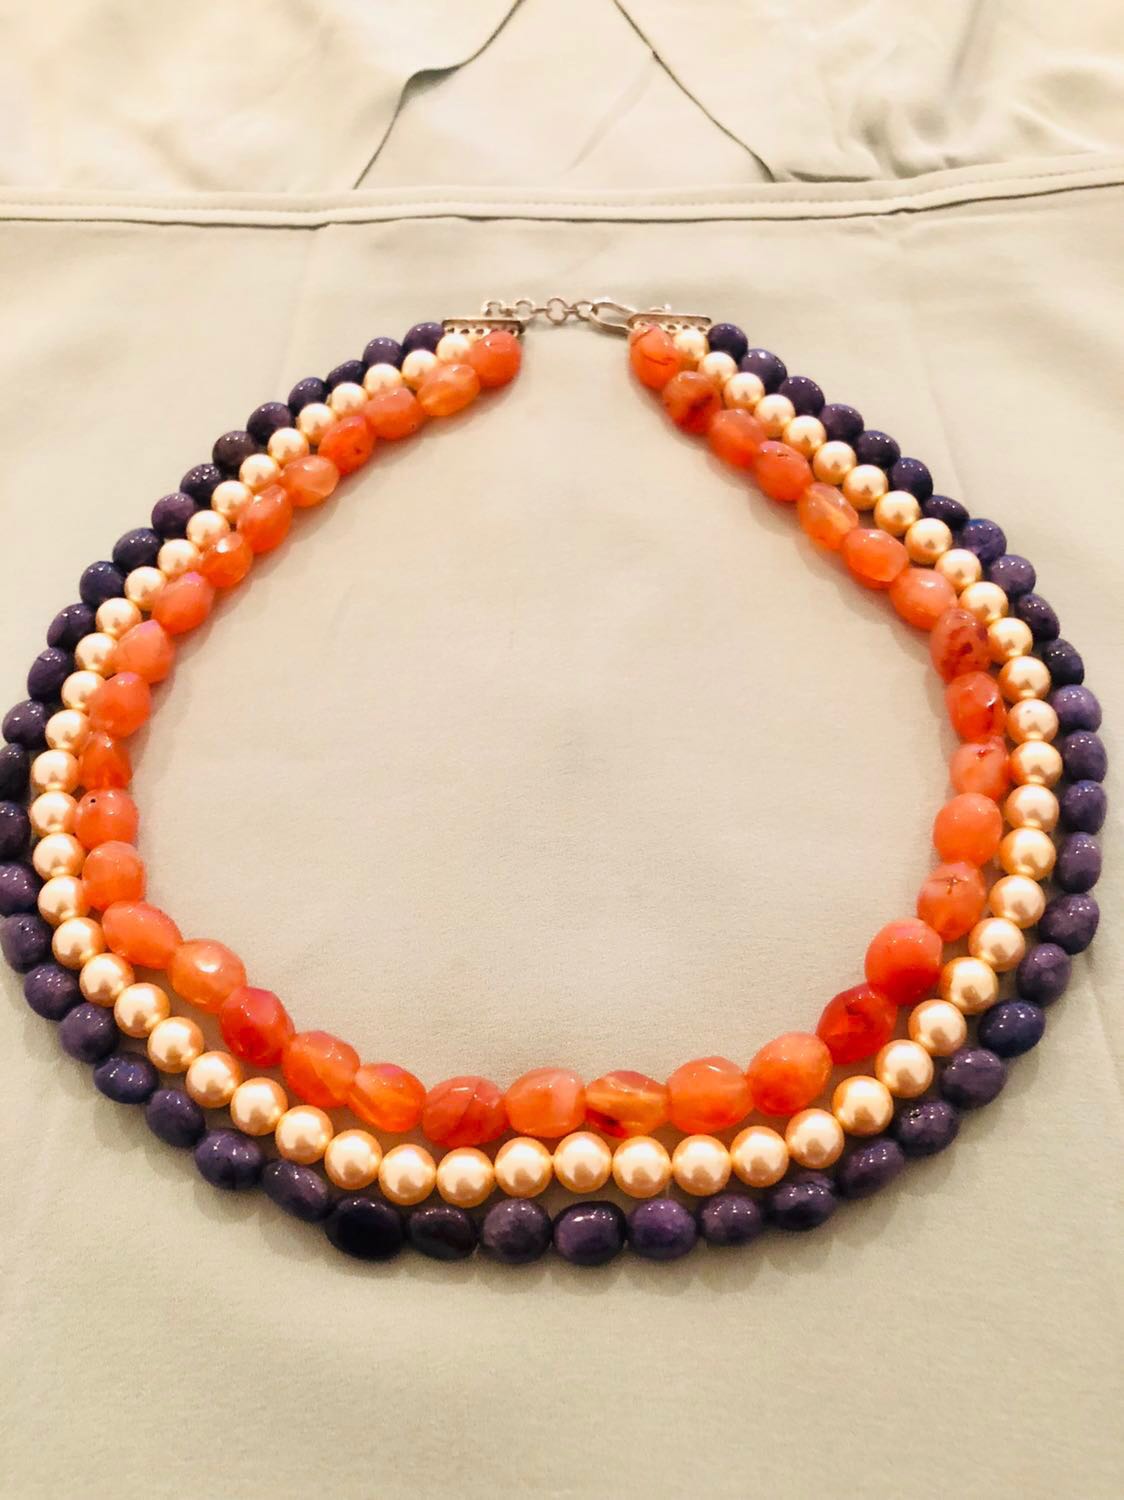 Triple Decker Necklace with Pearls, Corals and Blue Lapiz, Women's ...